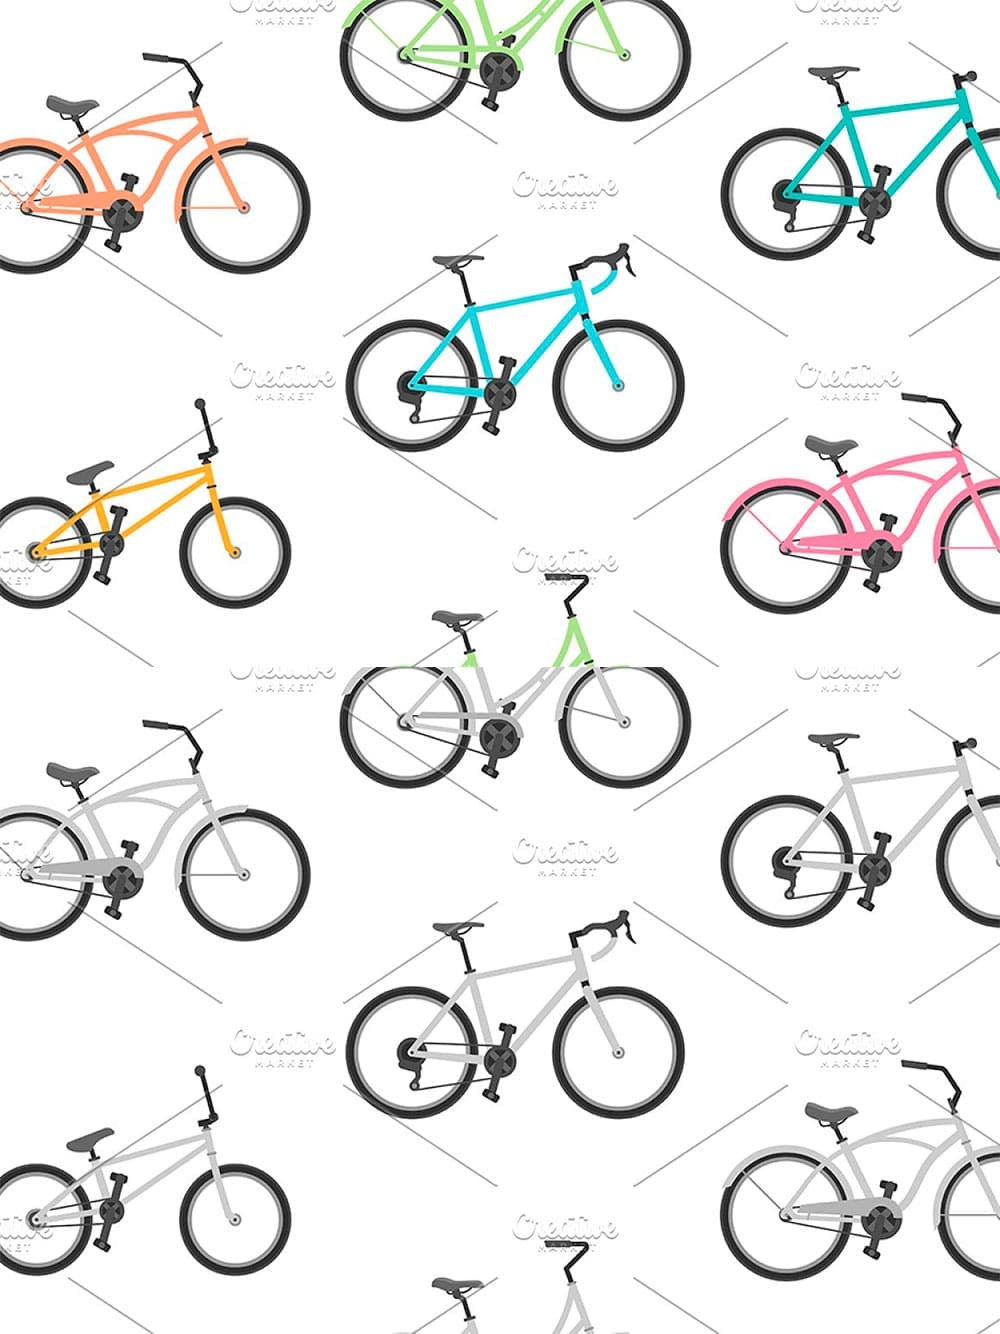 Pattern with bicycles, picture for pinterest.